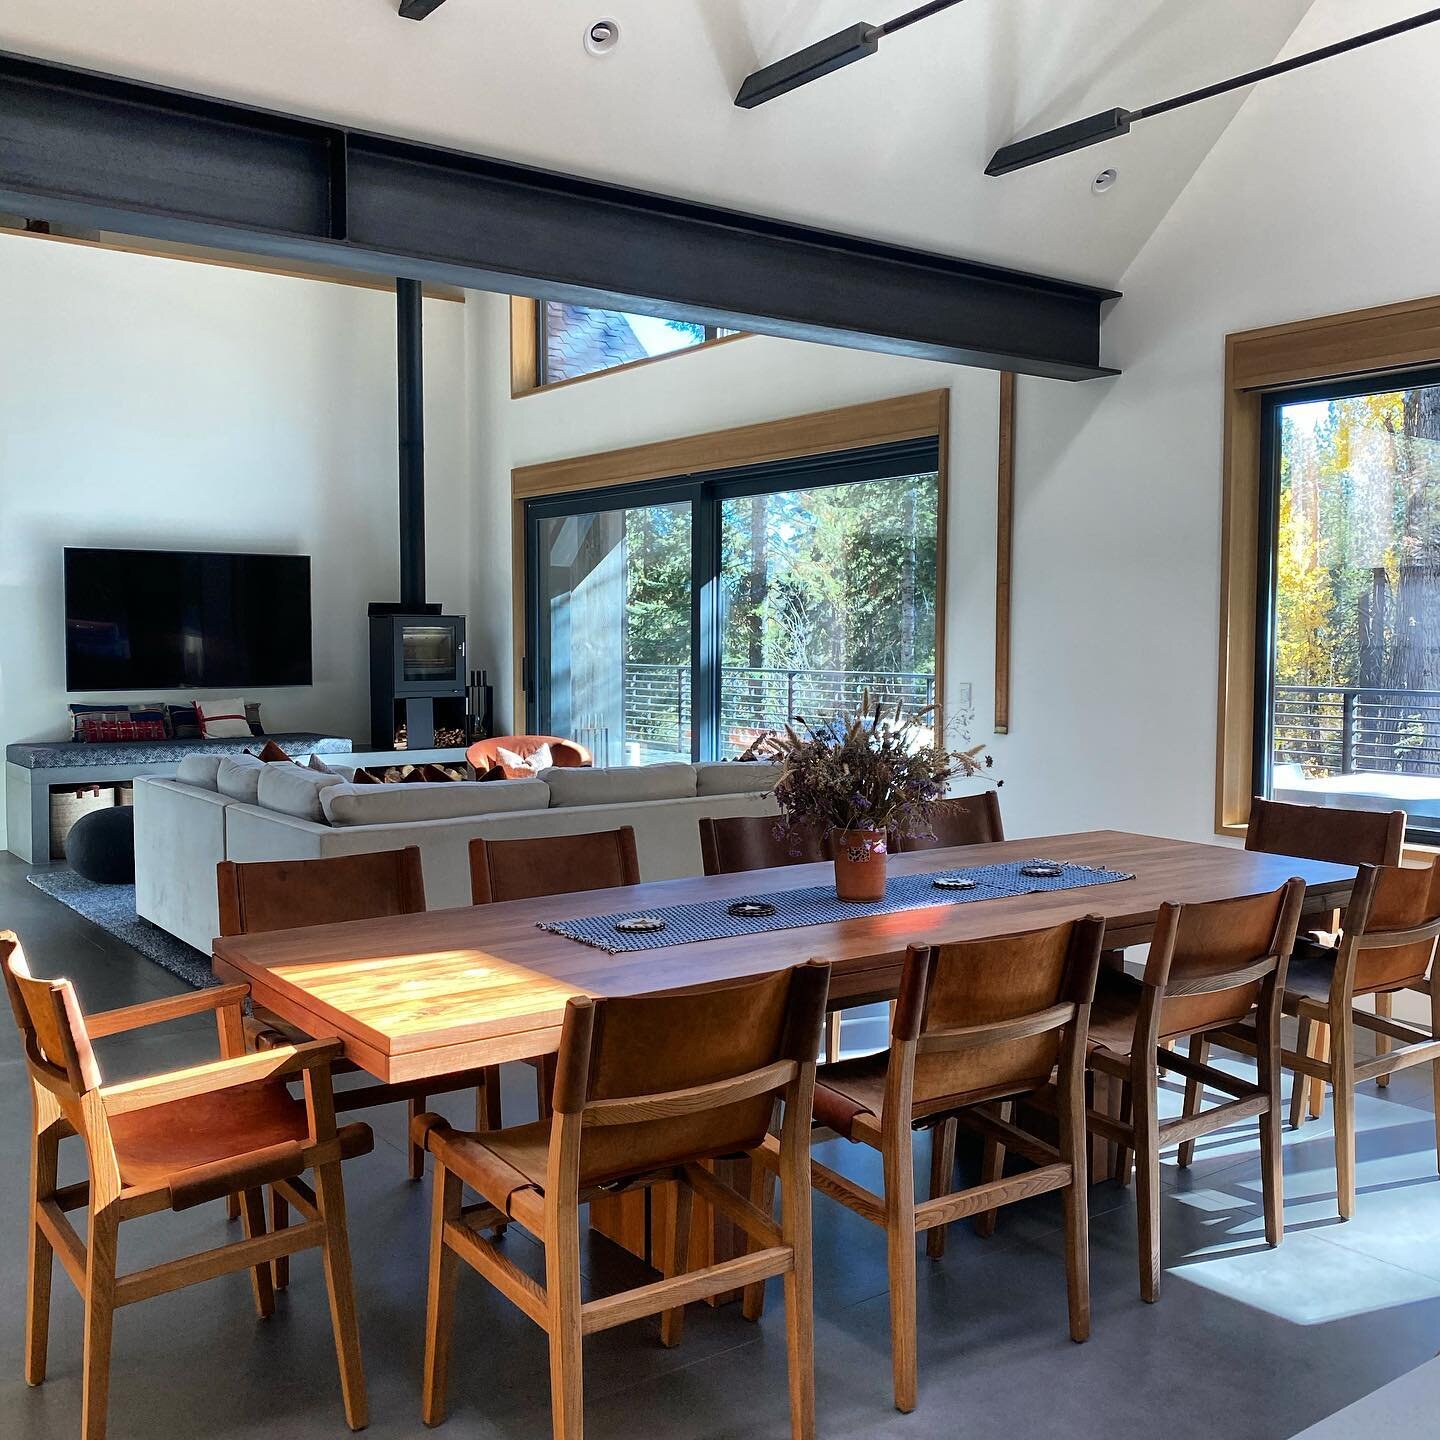 Field trip Friday to one of our favorites! 

Interior by @idthree 
#mountainmodern #tahoeliving #mountainliving #fieldtripfriday